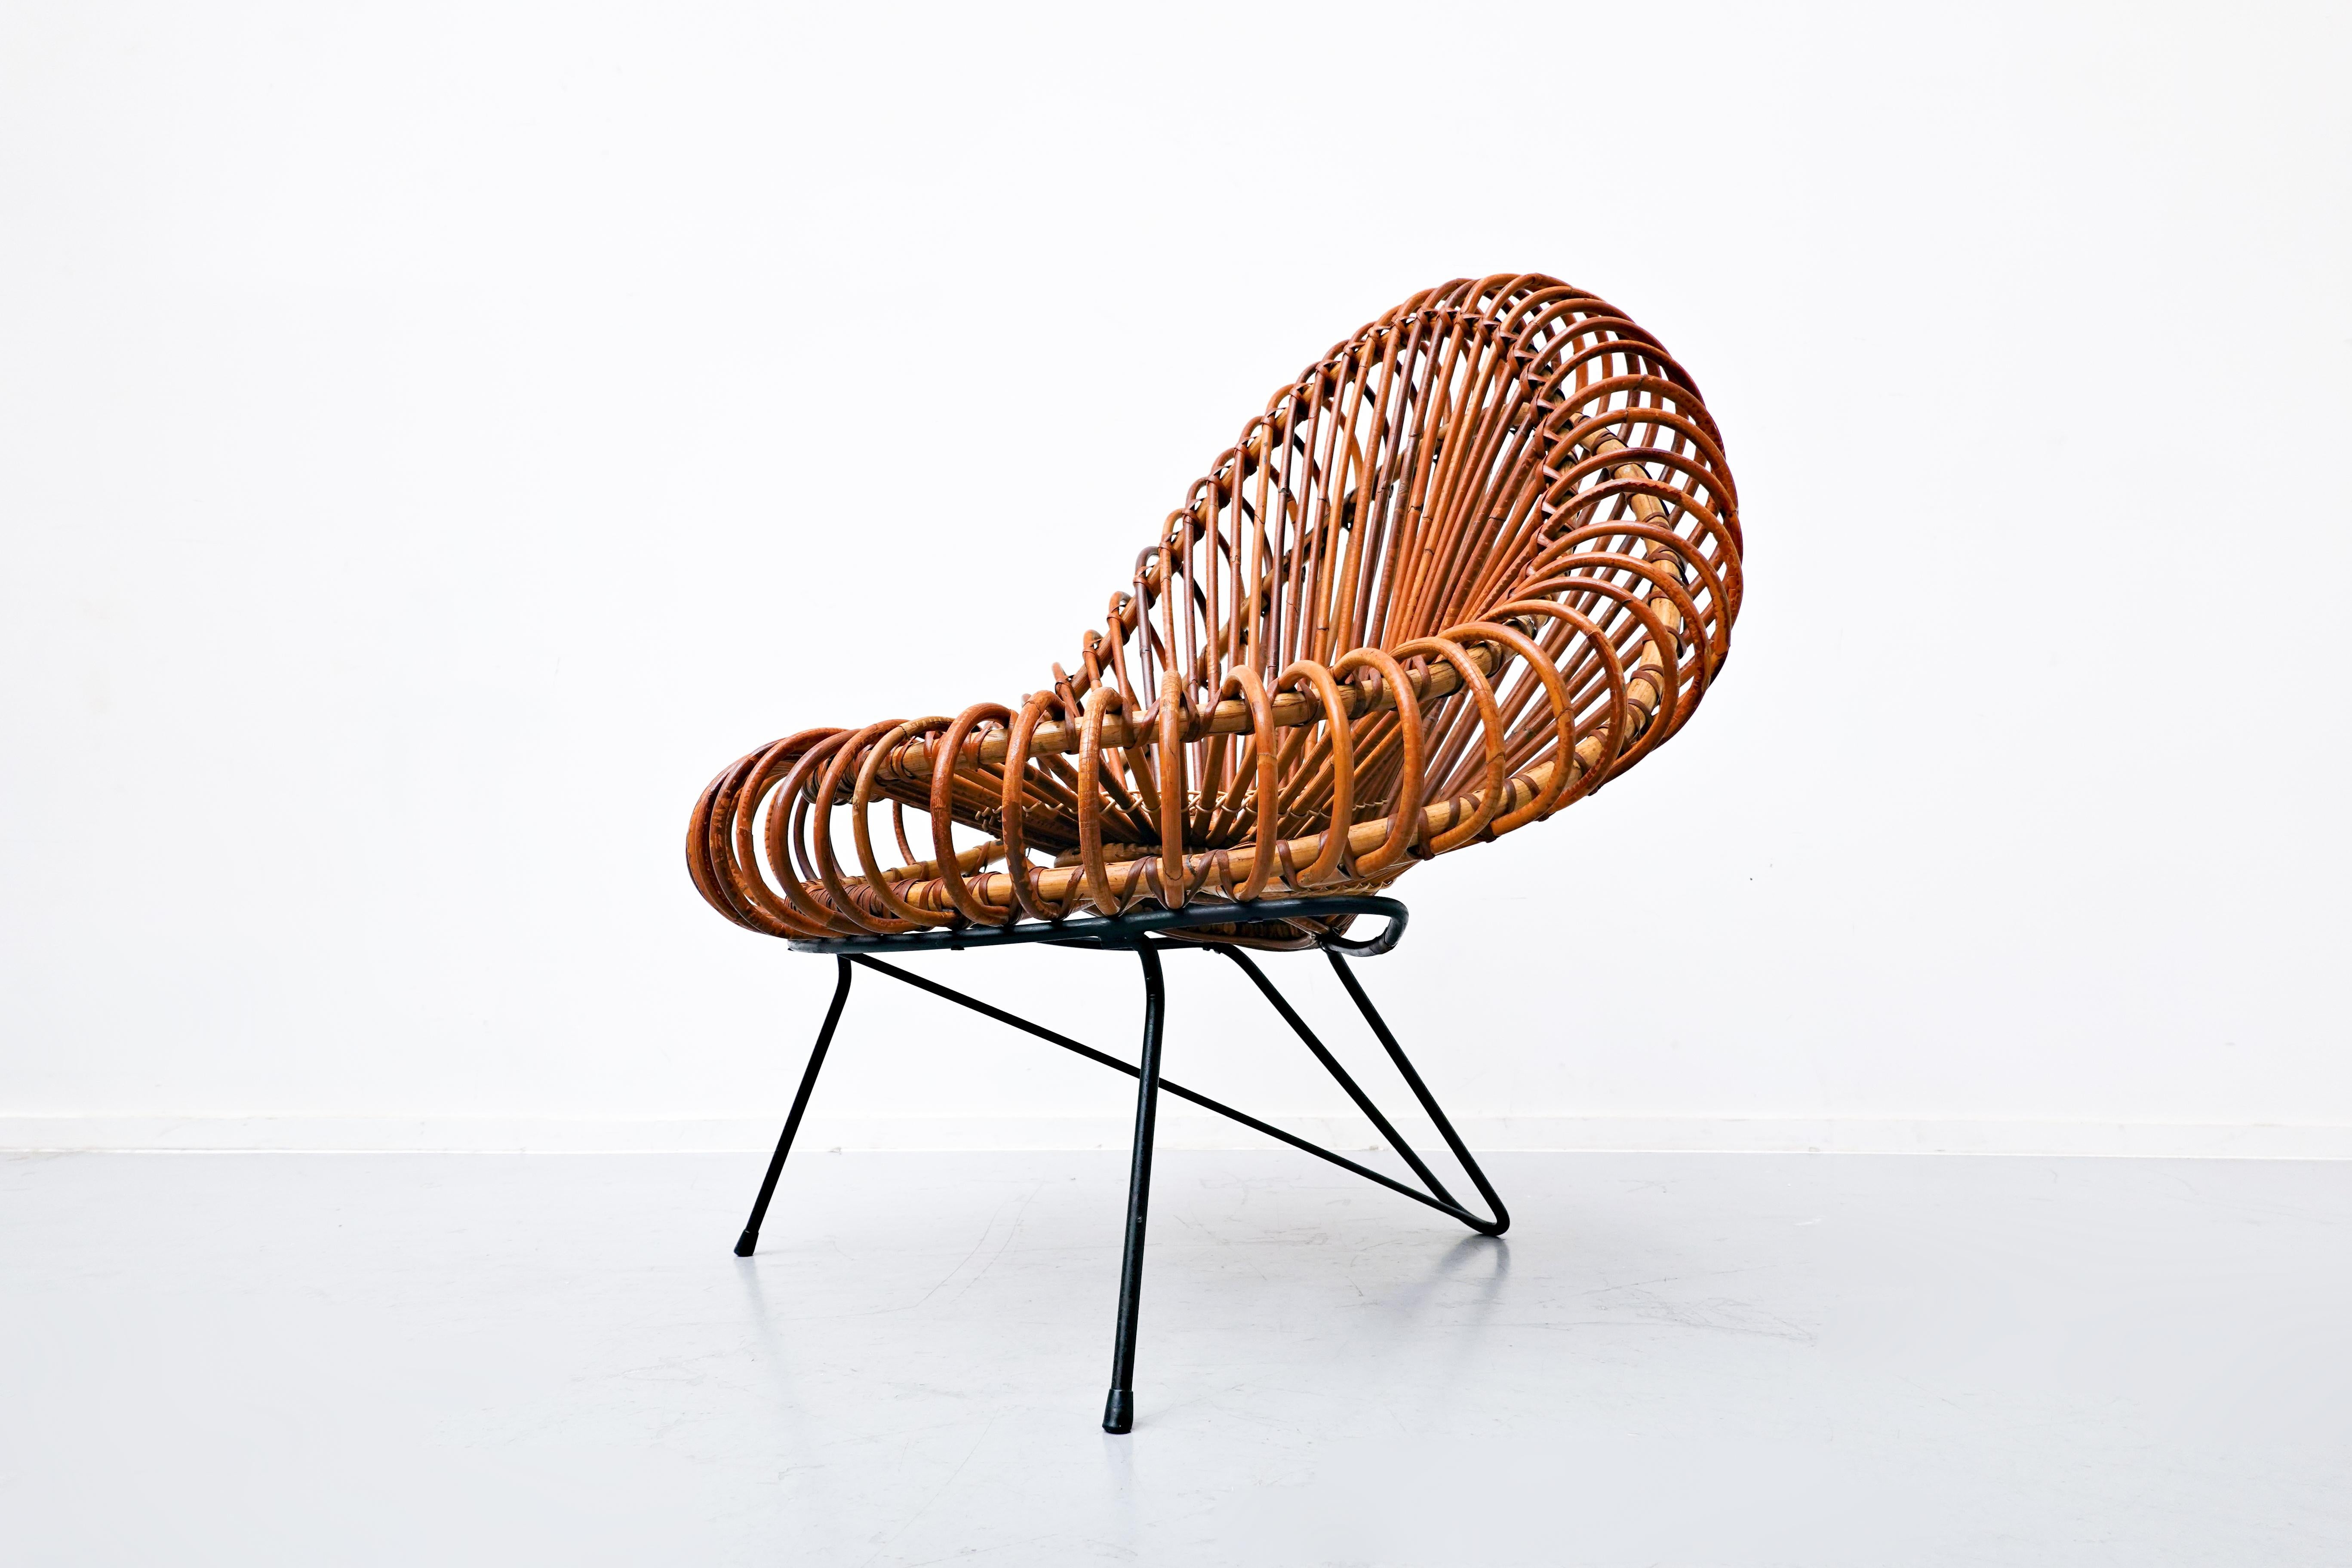 Rattan Pair of Mid-Century Chairs by Janine Abraham & Dirk Jan Rol,  Rougier, 1950s